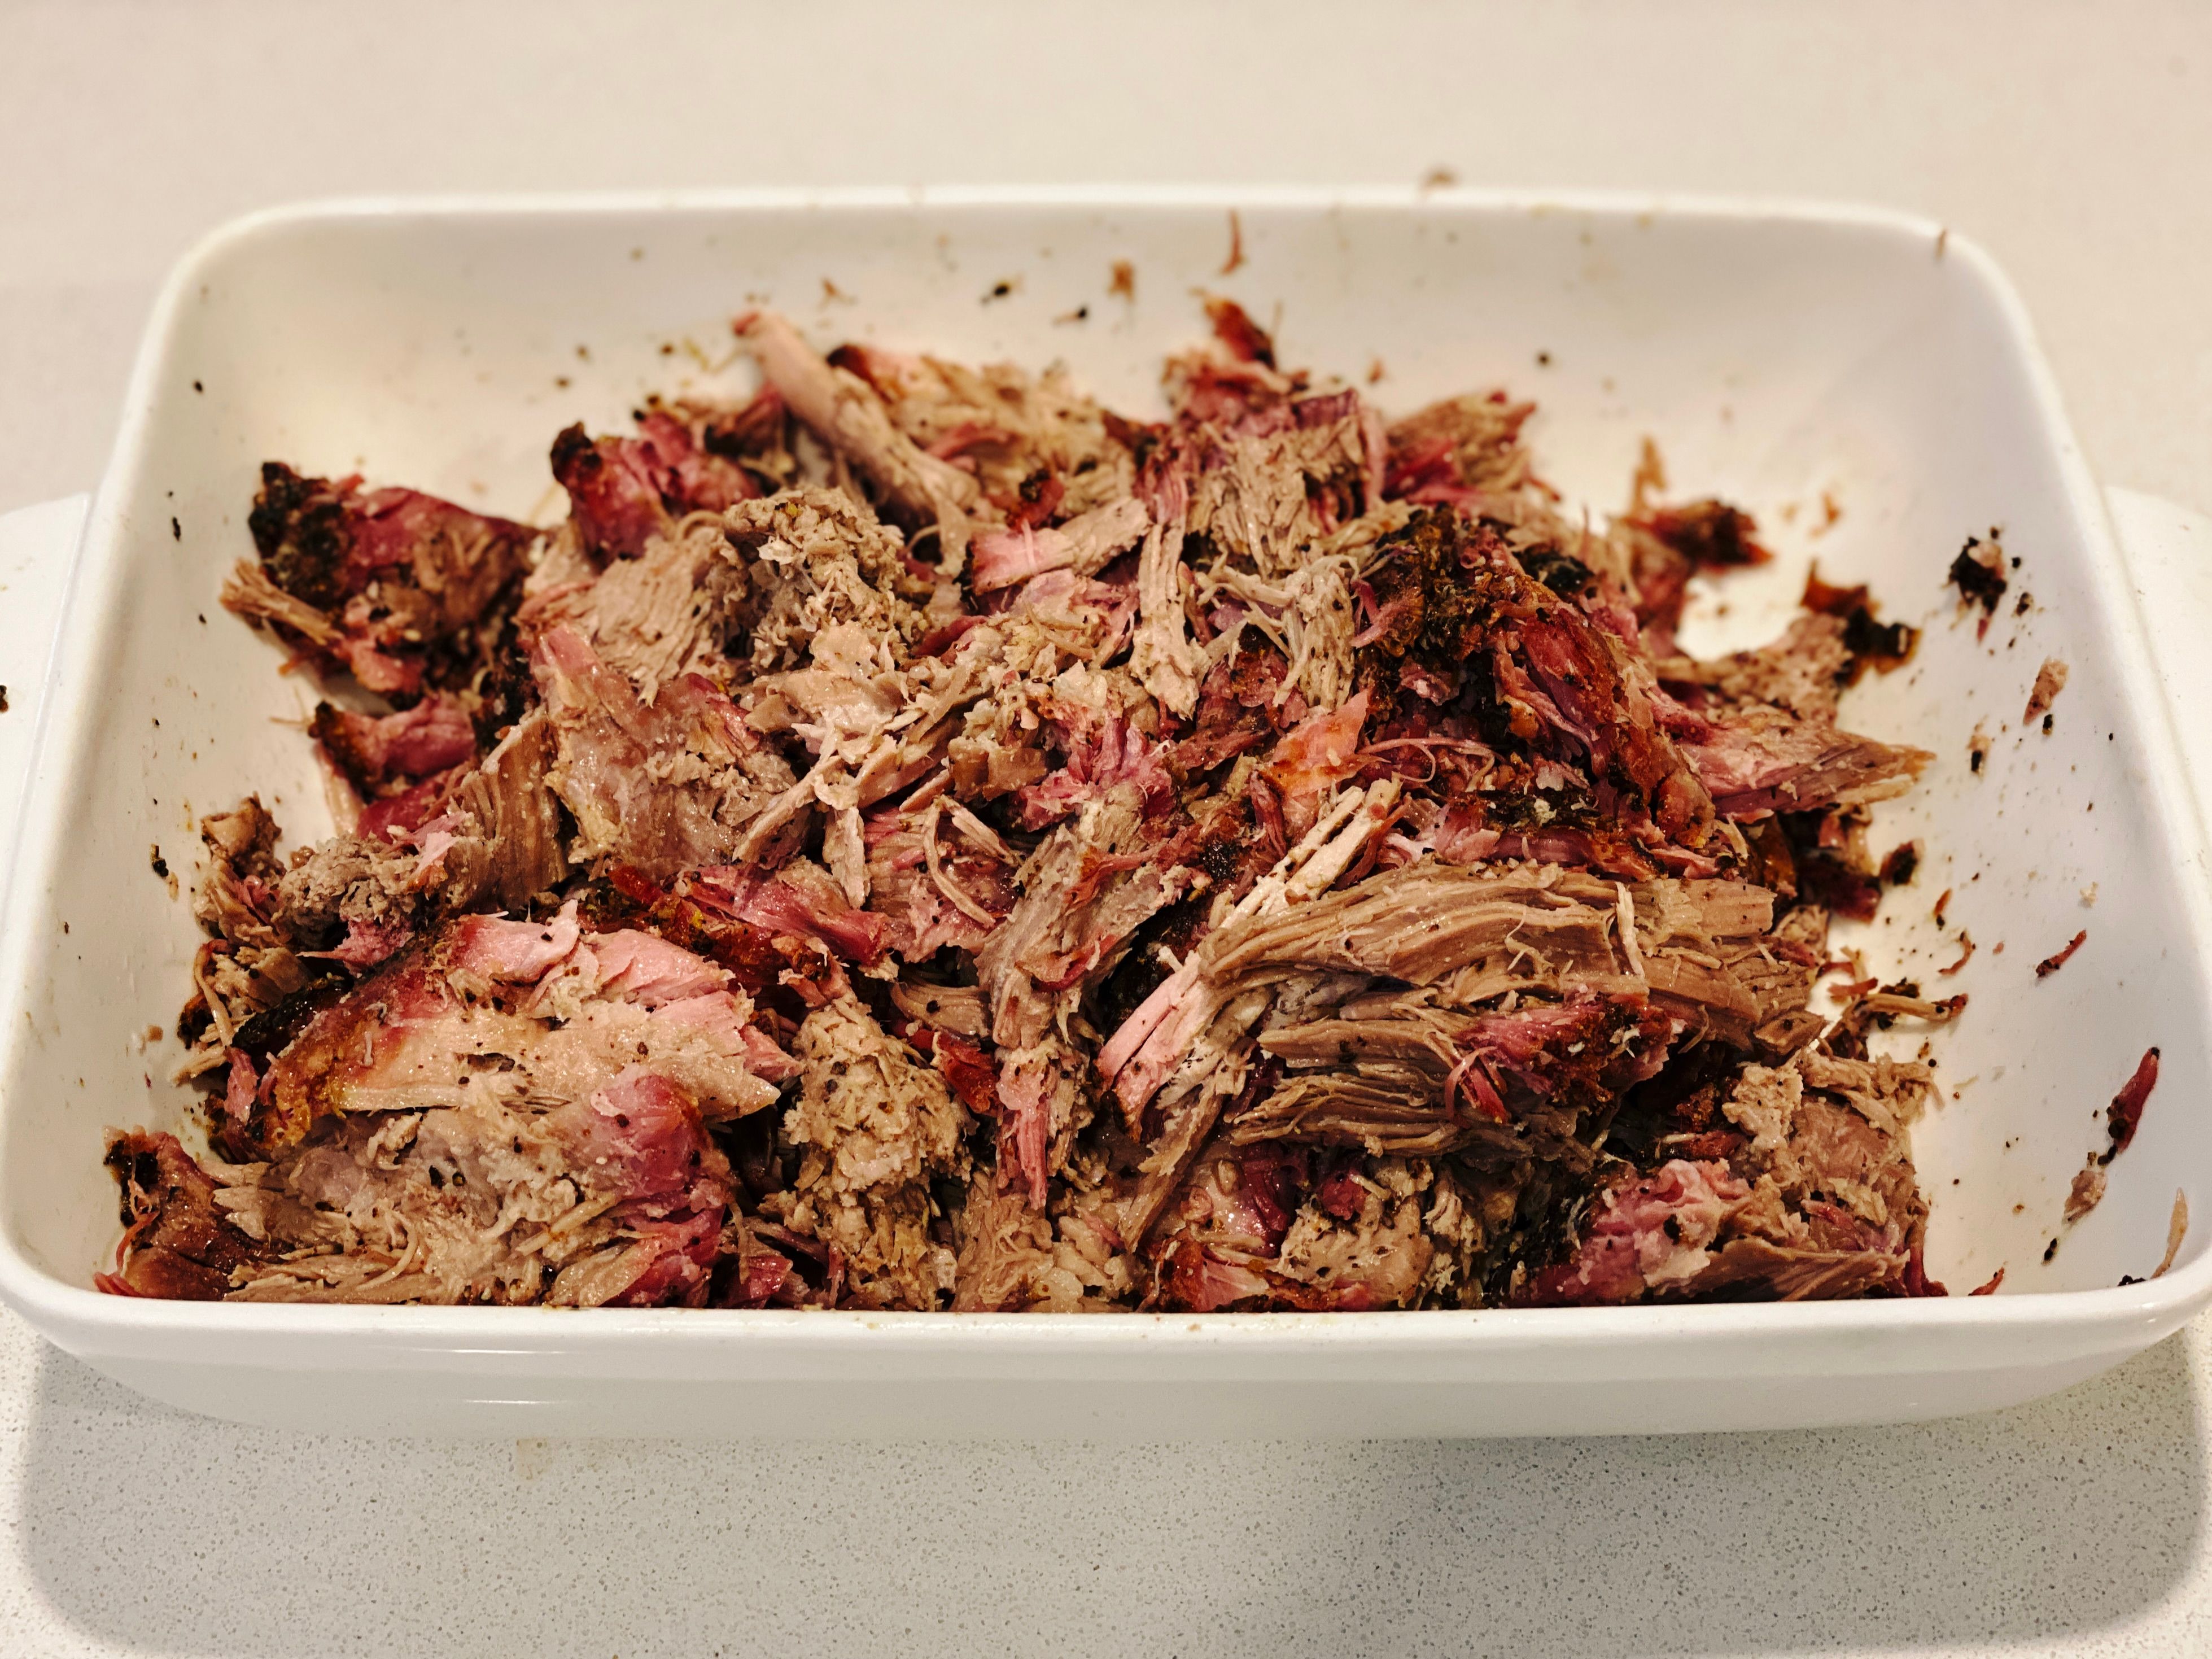 A photo of a big white dish with smoked pulled pork in it that's been all pulled apart. There's an absolutely magnificent-looking pink smoke ring in the pieces of meat.